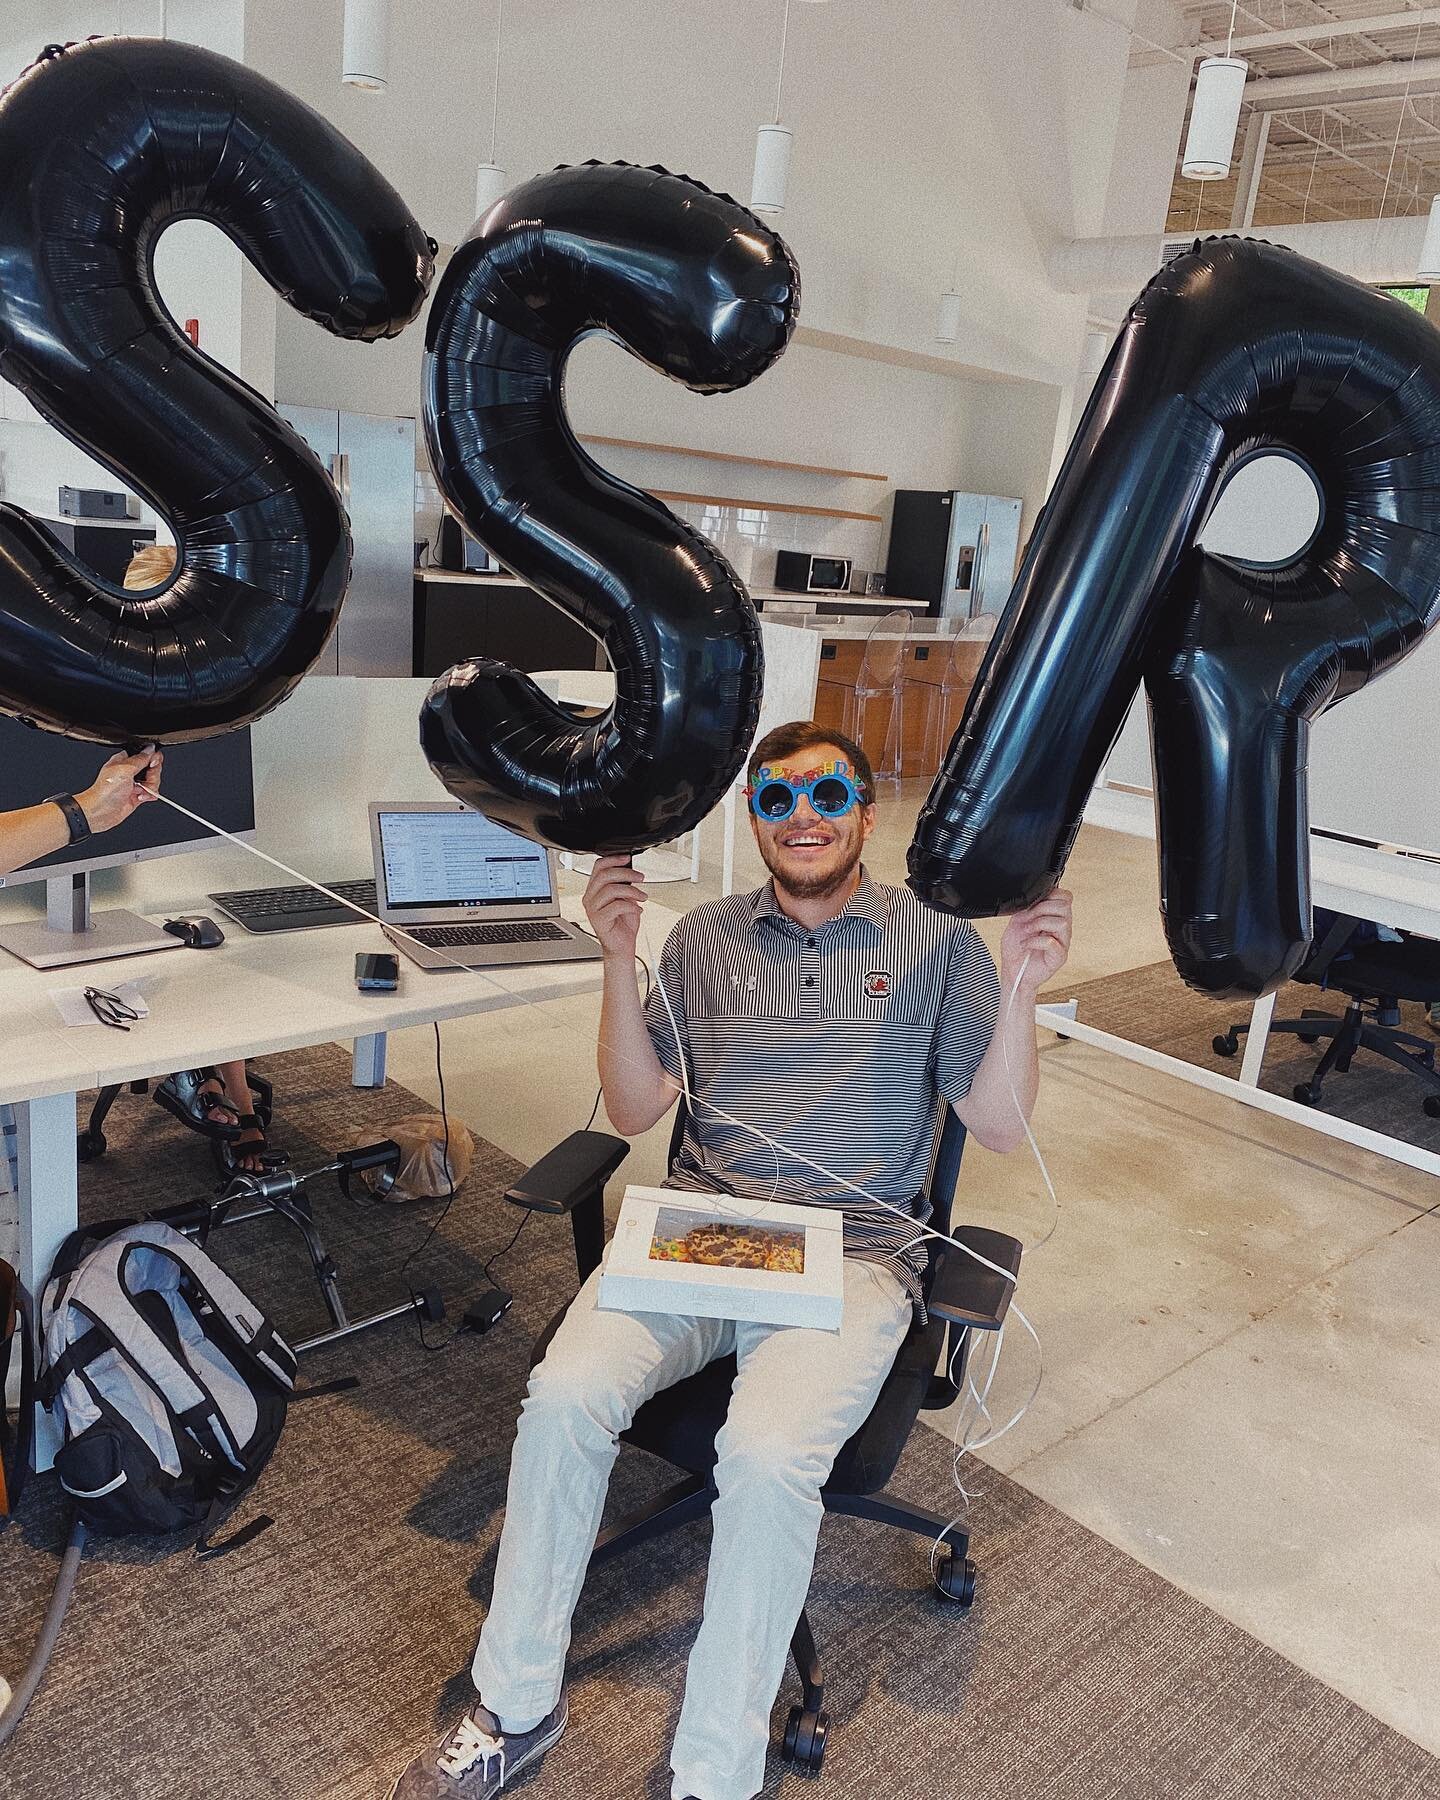 What a day!! Congratulations AND a happy happy birthday to @sebi.fas!! We're so proud of all your hard work and know you'll continue to crush it as a Senior Sales Recruiter! Way to go Sebi!! 🥳👏🏼